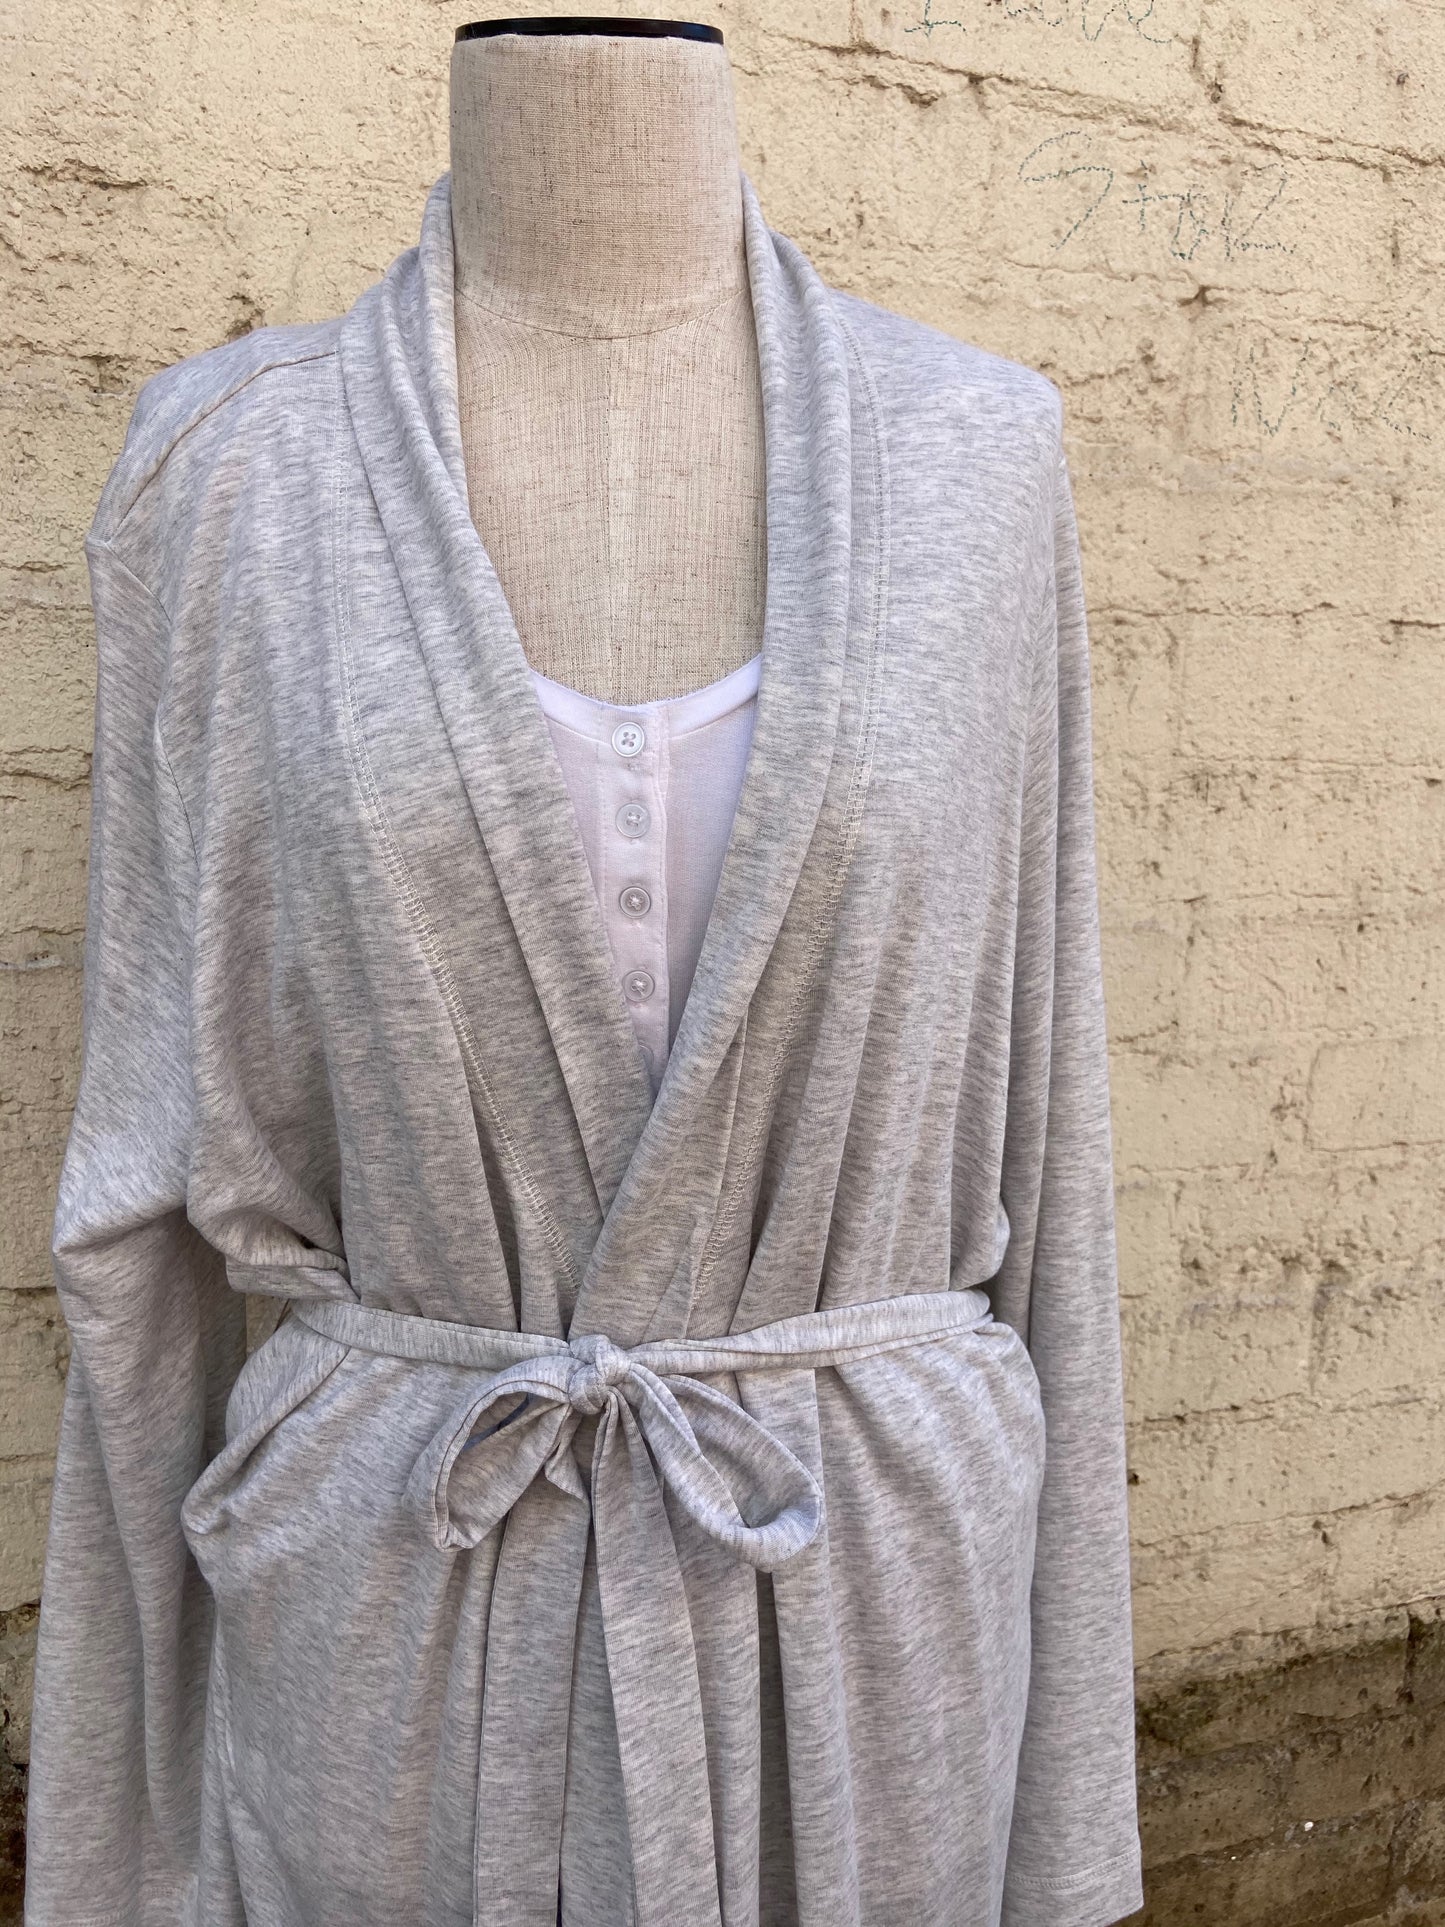 Relaxed fit, pebble grey robe. 95% Modal/5% Spandex. Back of robe has words that read, "Sleep in".